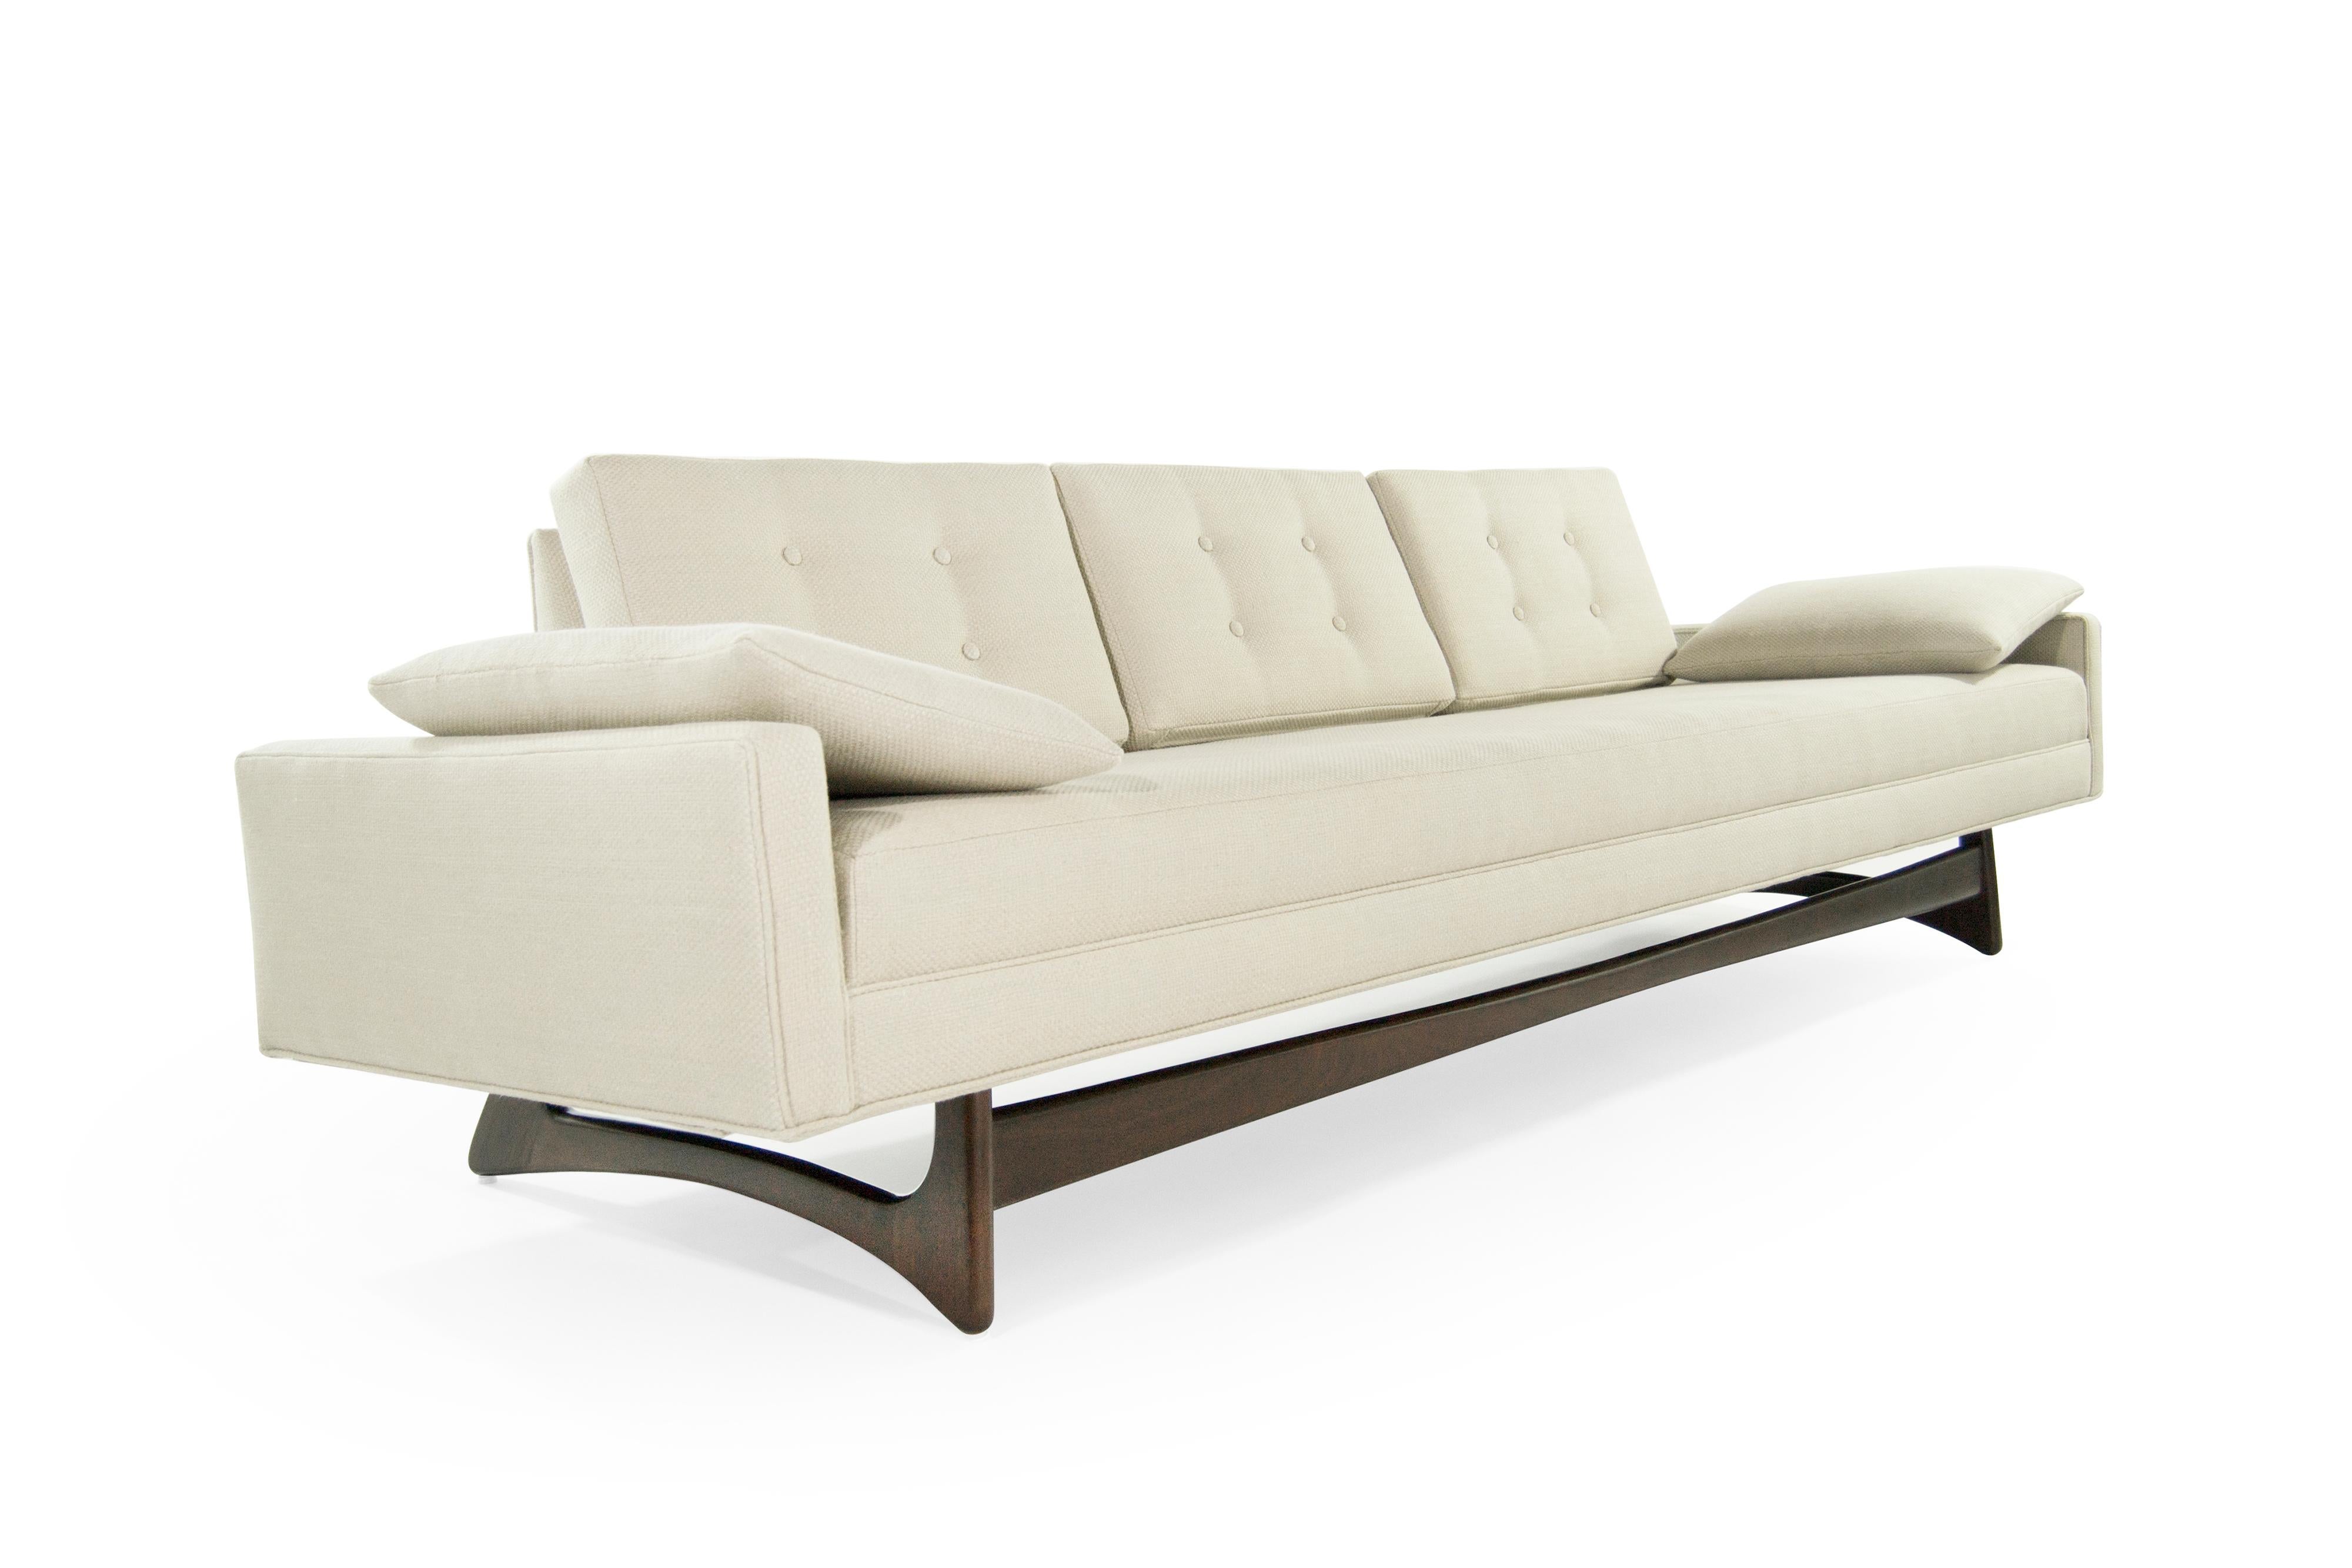 Adrian Pearsall for Craft Associates Sofa, Model 2408 In Excellent Condition In Westport, CT